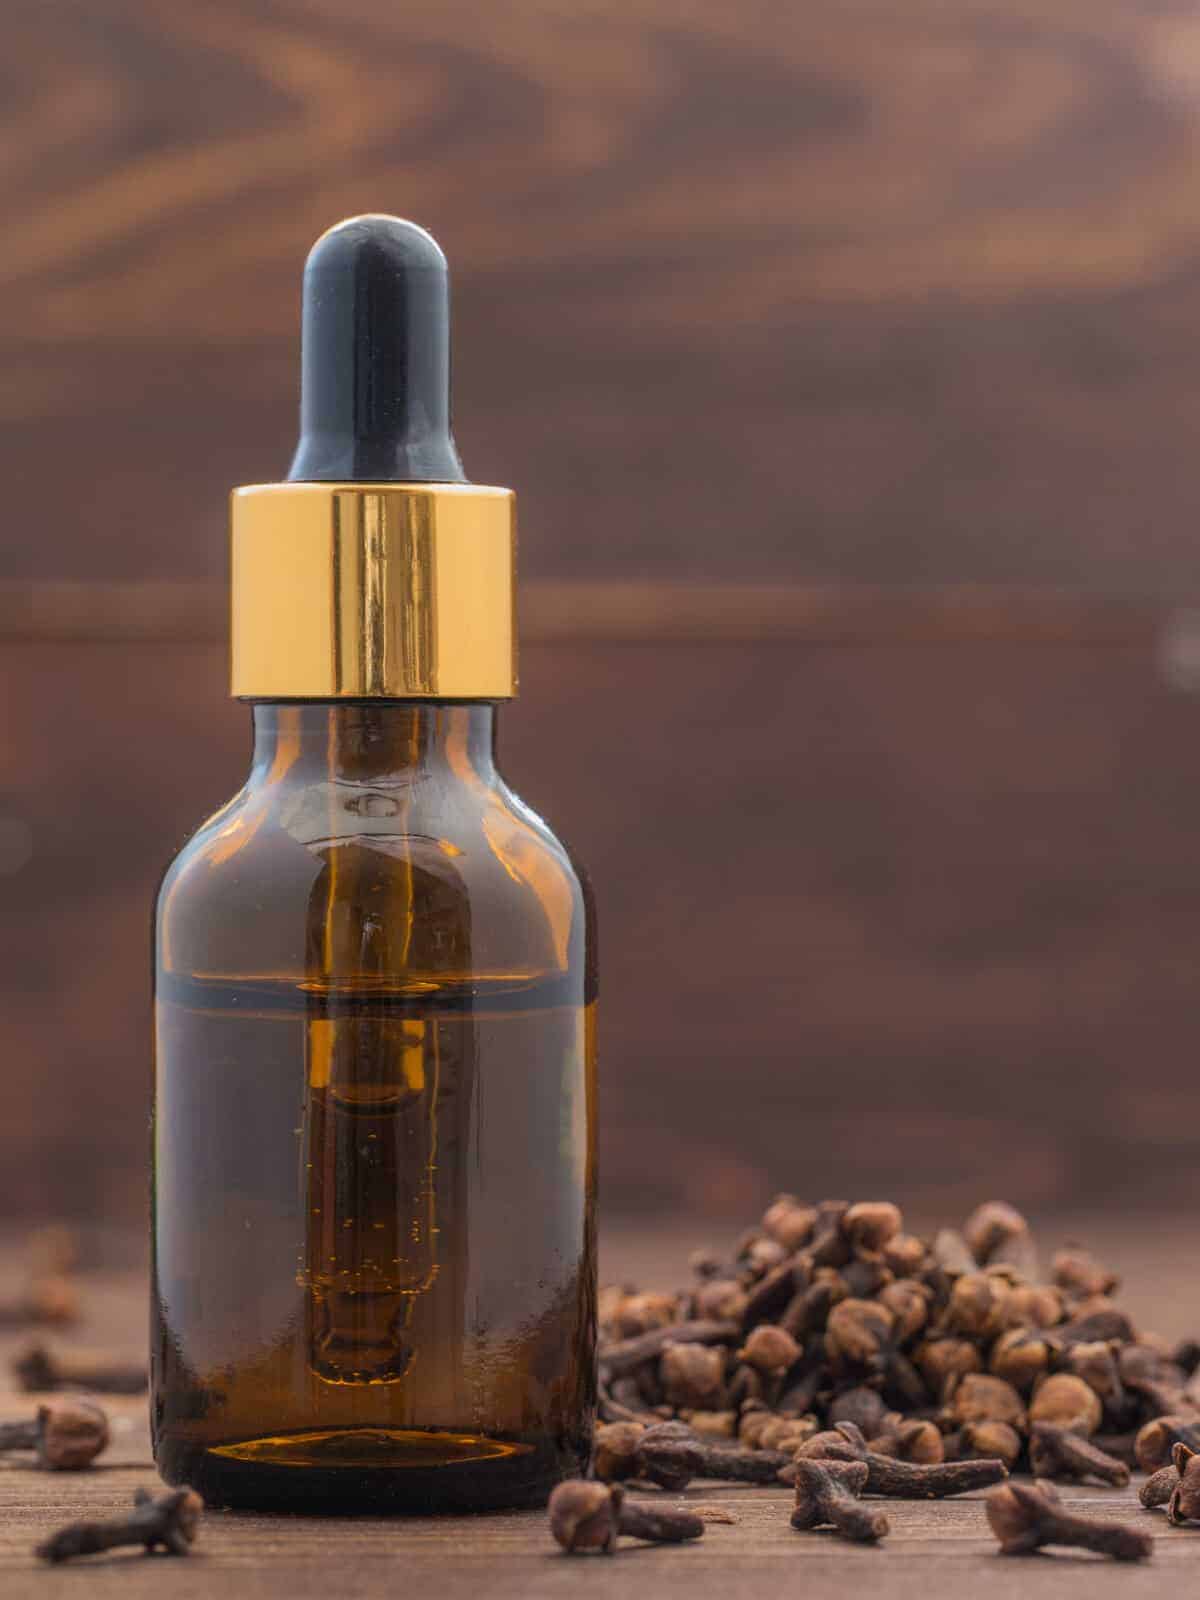 An amber bottle of clove essential oil surrounded by cloves.